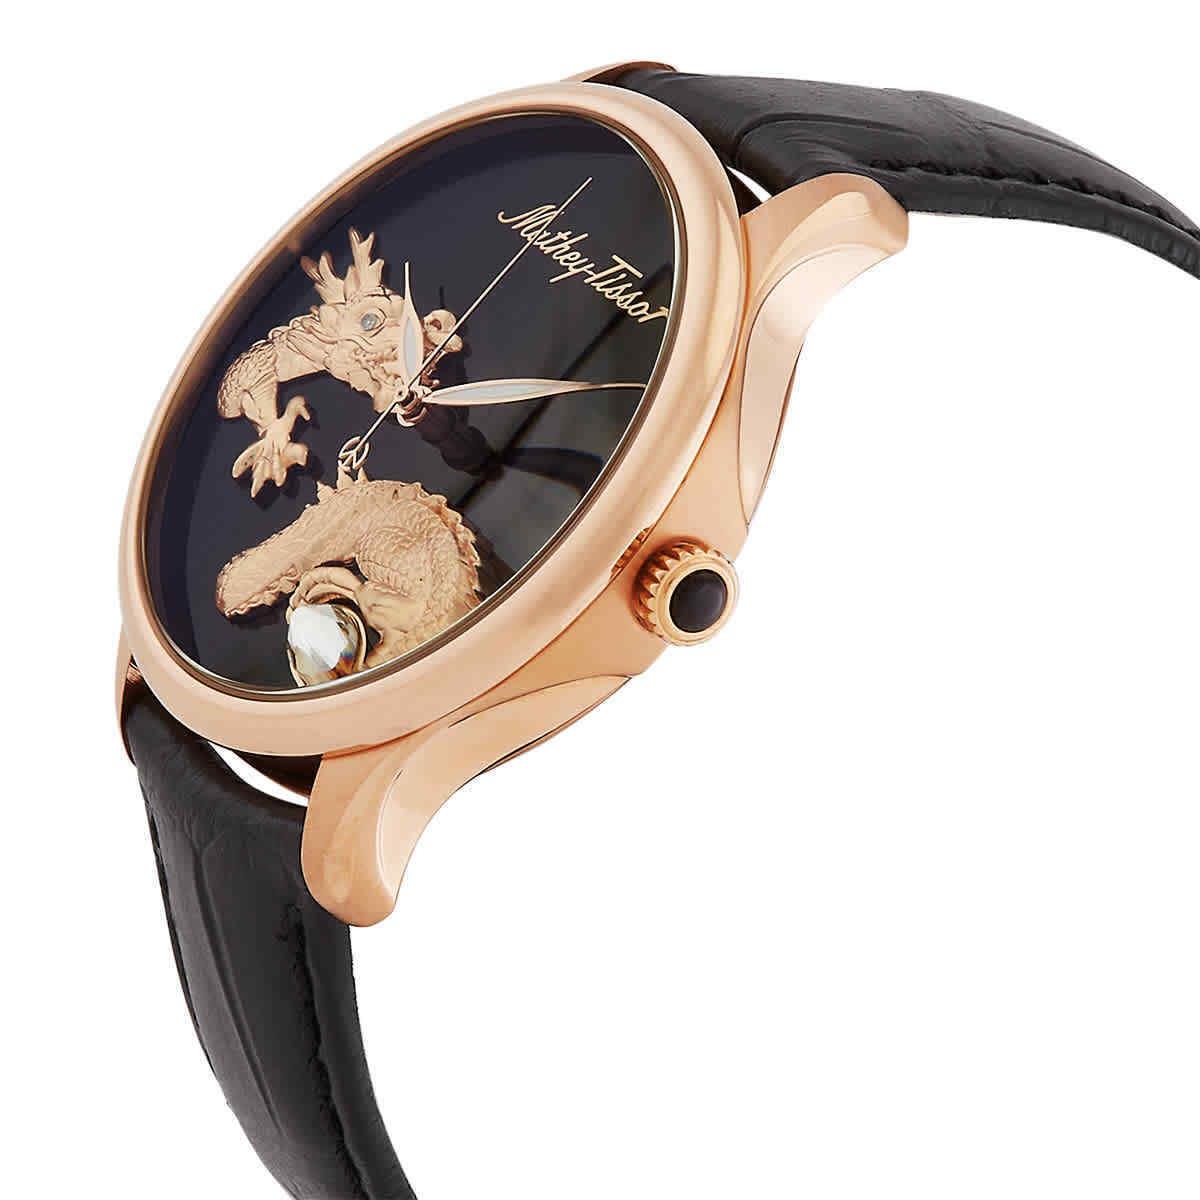 Mathey-tissot Dragon Limited Edition Automatic Men`s Watch MD1886PN